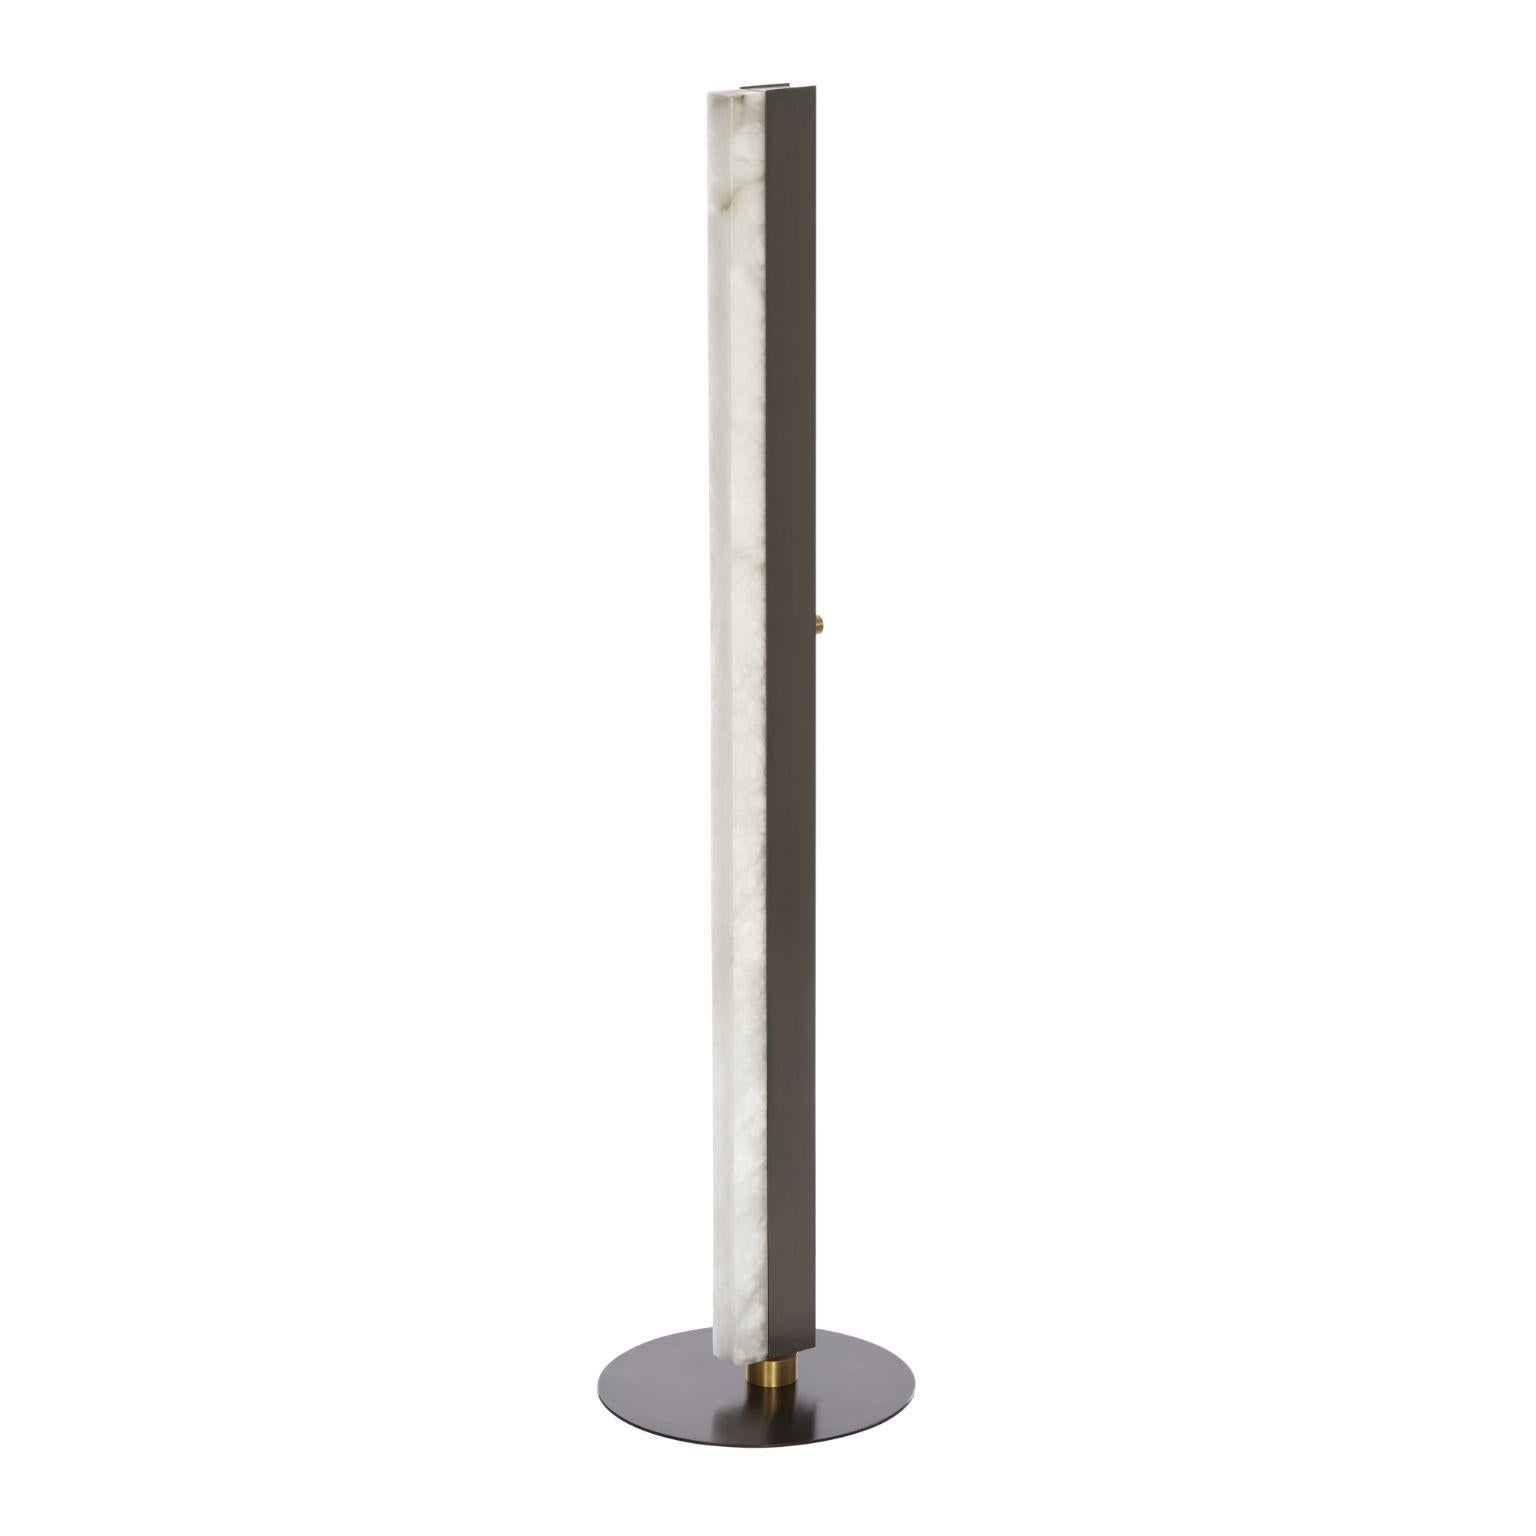 Bronze Artés floor lamp by CTO Lighting
Materials: Bronze, satin brass details and honed alabaster integrated dimmer switch
Dimensions: 30 x H 122 cm

All our lamps can be wired according to each country. If sold to the USA it will be wired for the